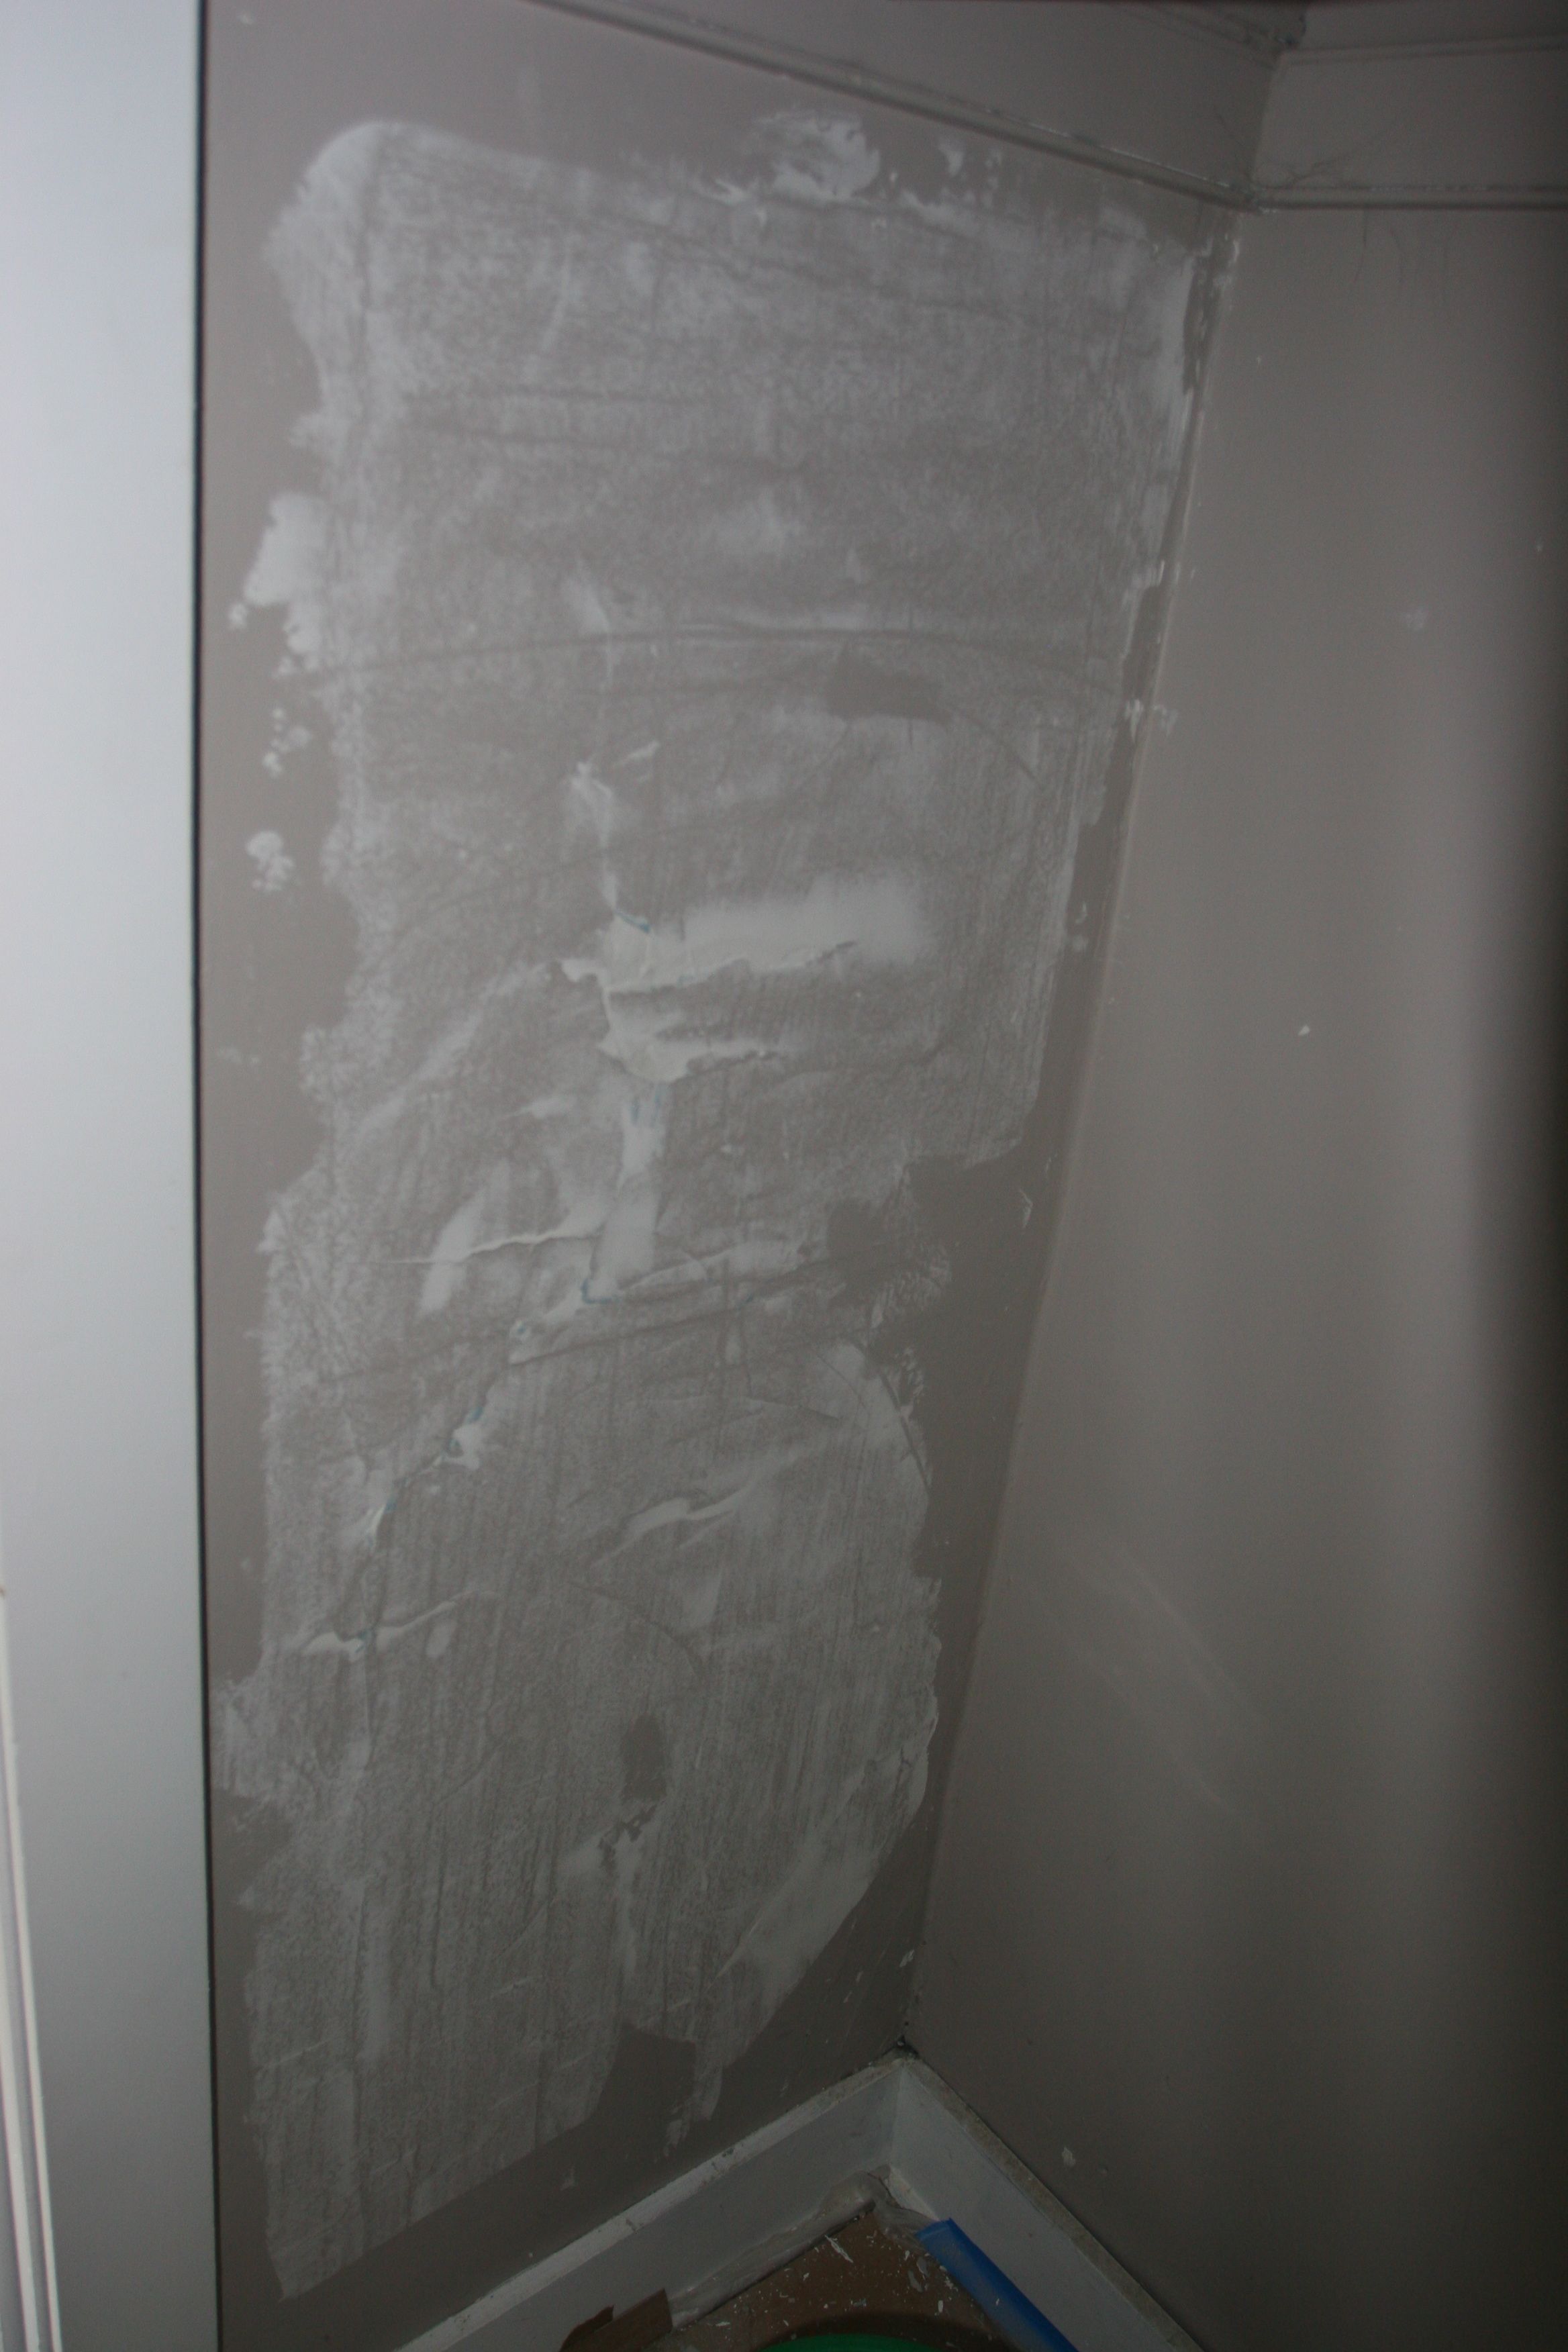 First skim coat to remedy hammer-stressed plaster in master closet.